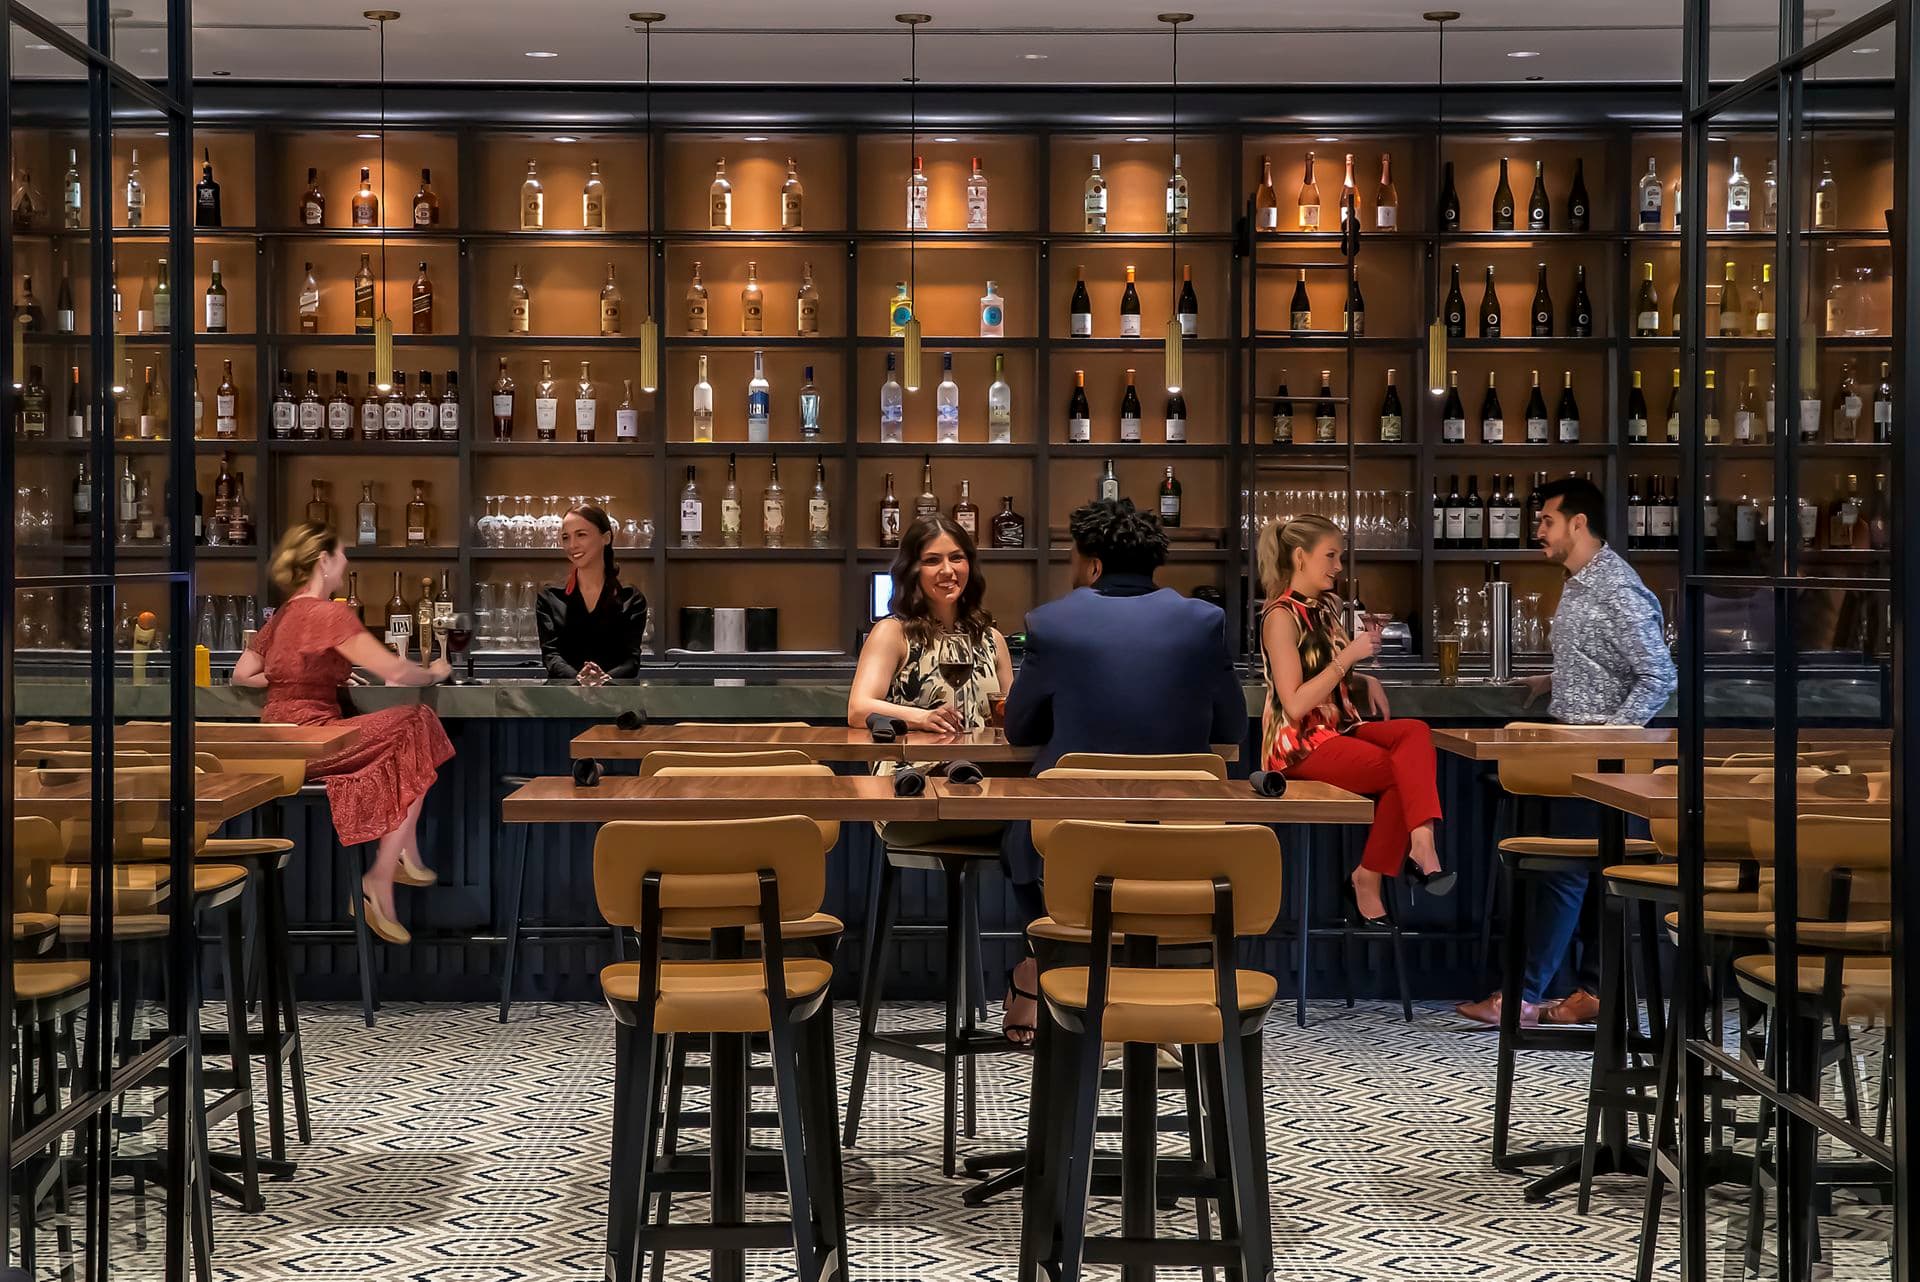 Connect with colleagues and clients over happy hour drinks at One North Kitchen.